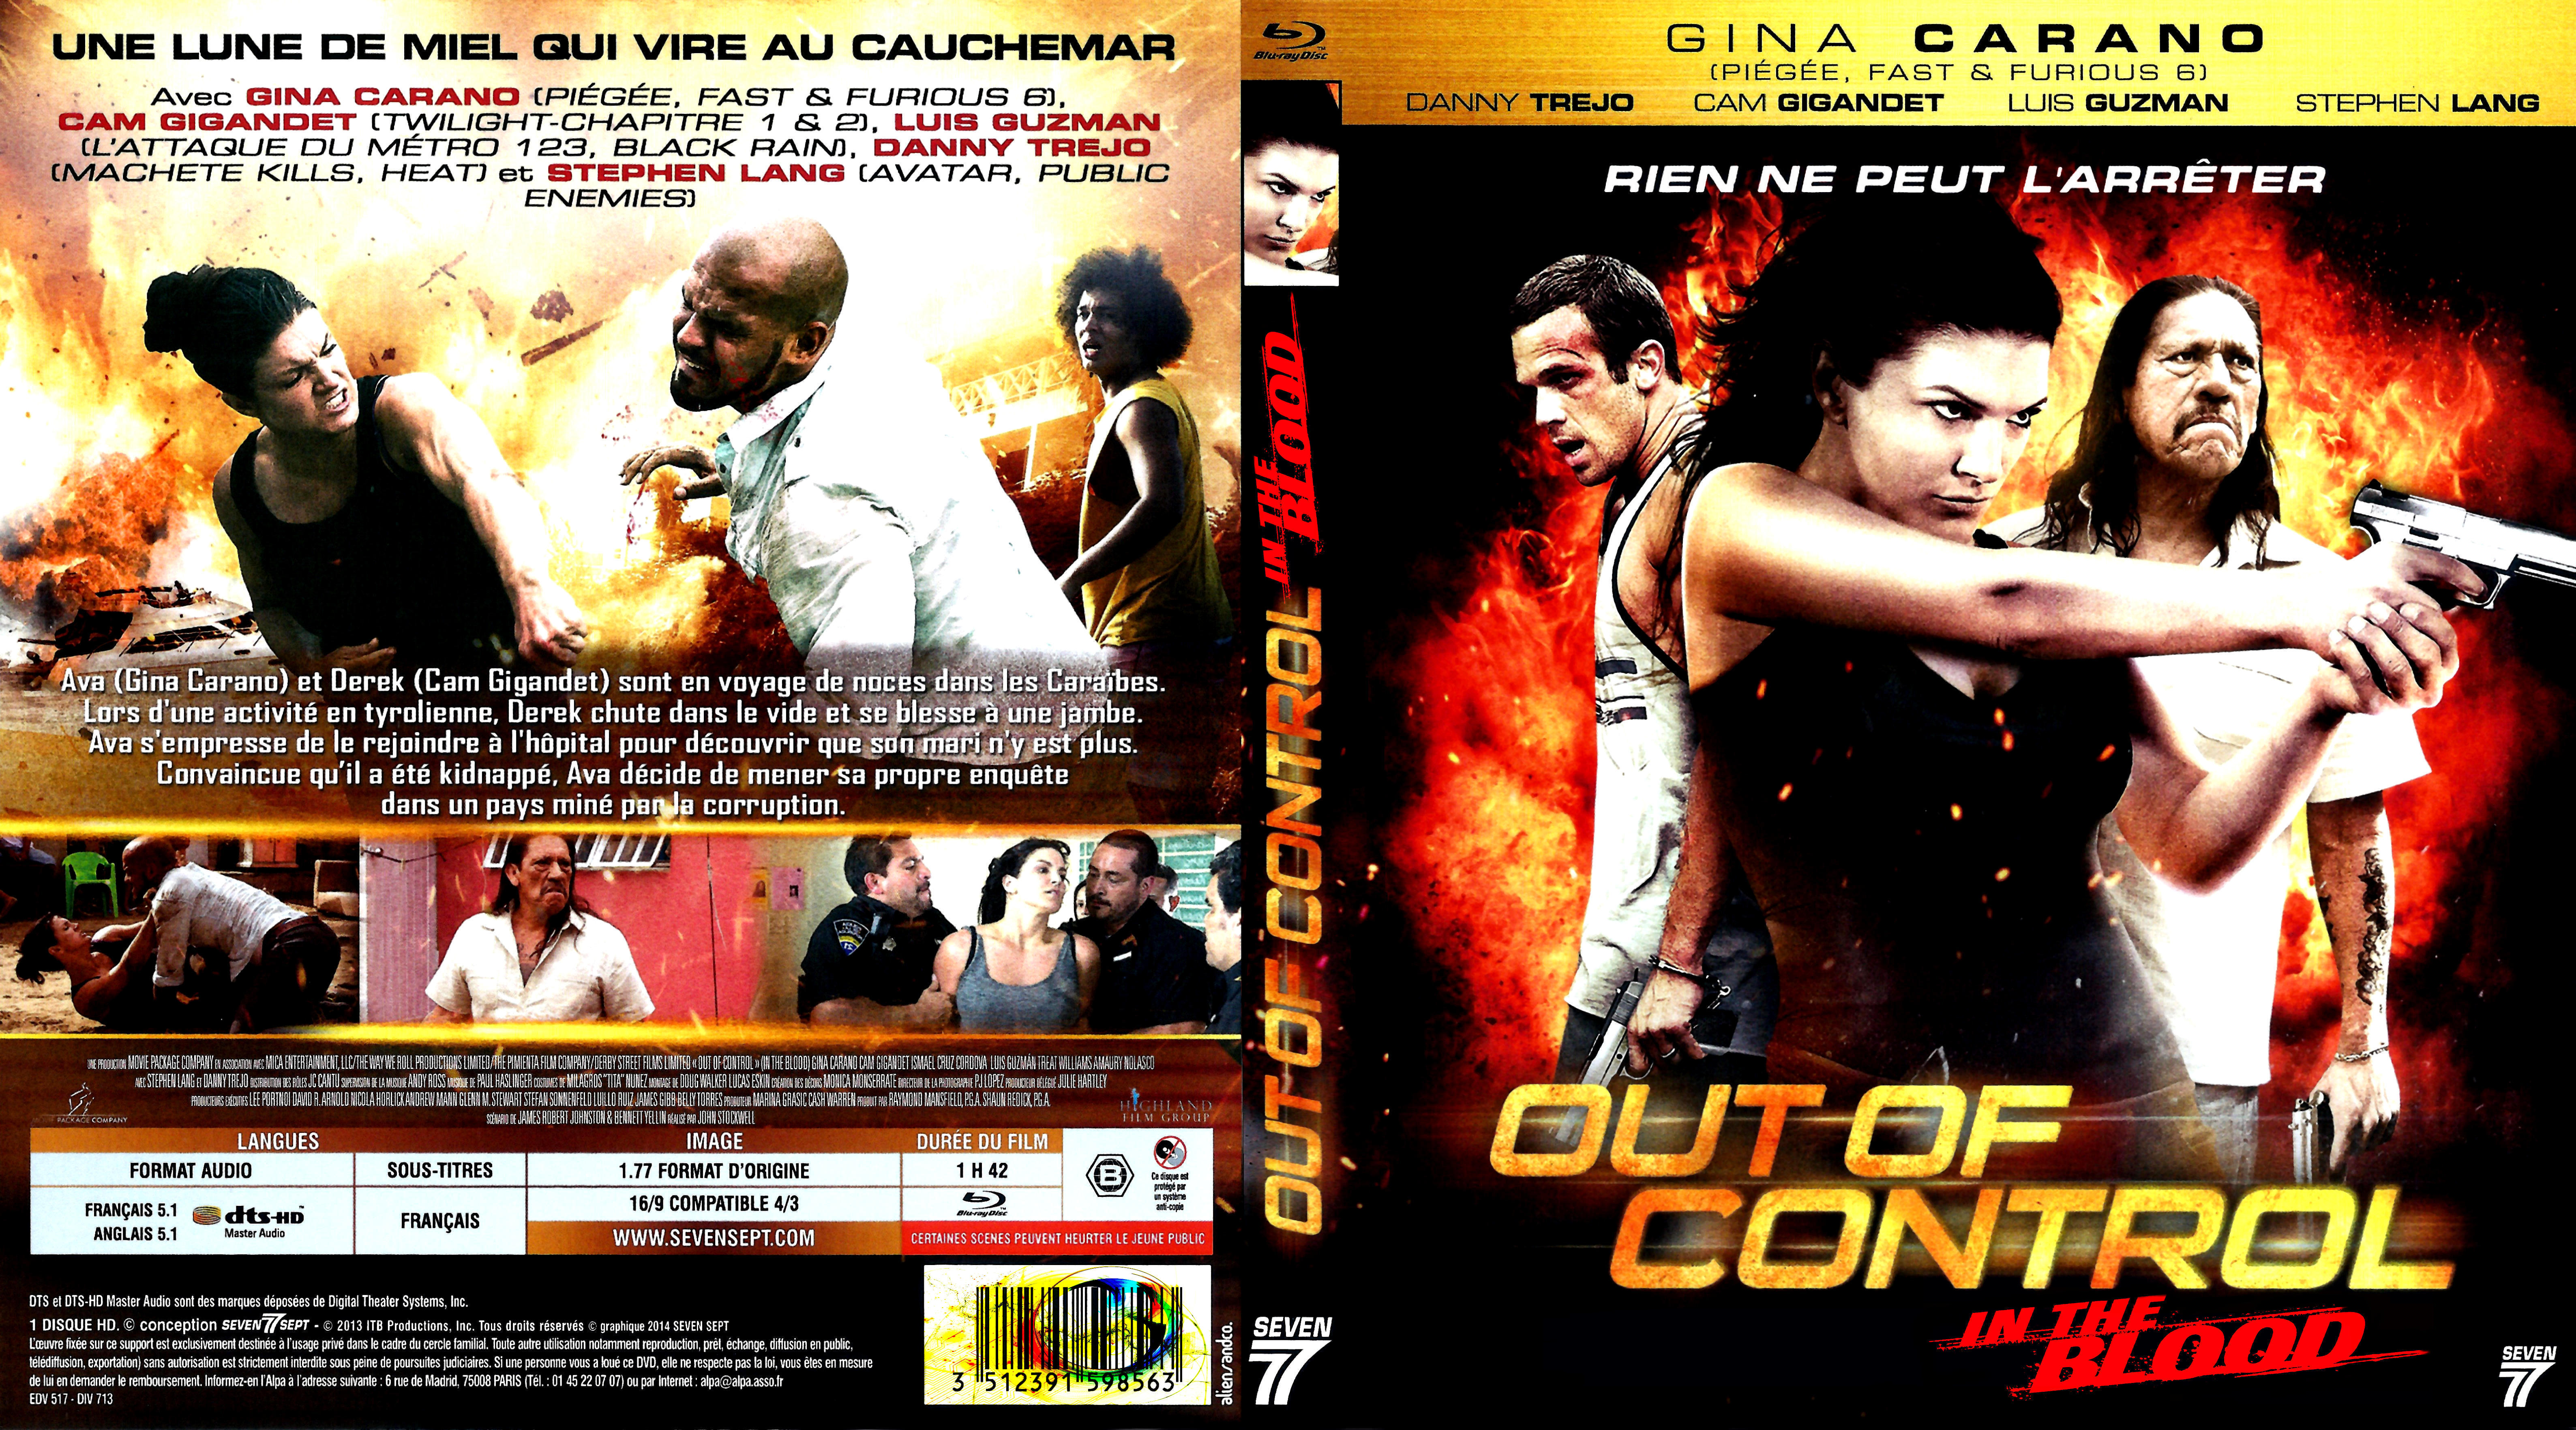 Jaquette DVD Out of Control (BLU-RAY)